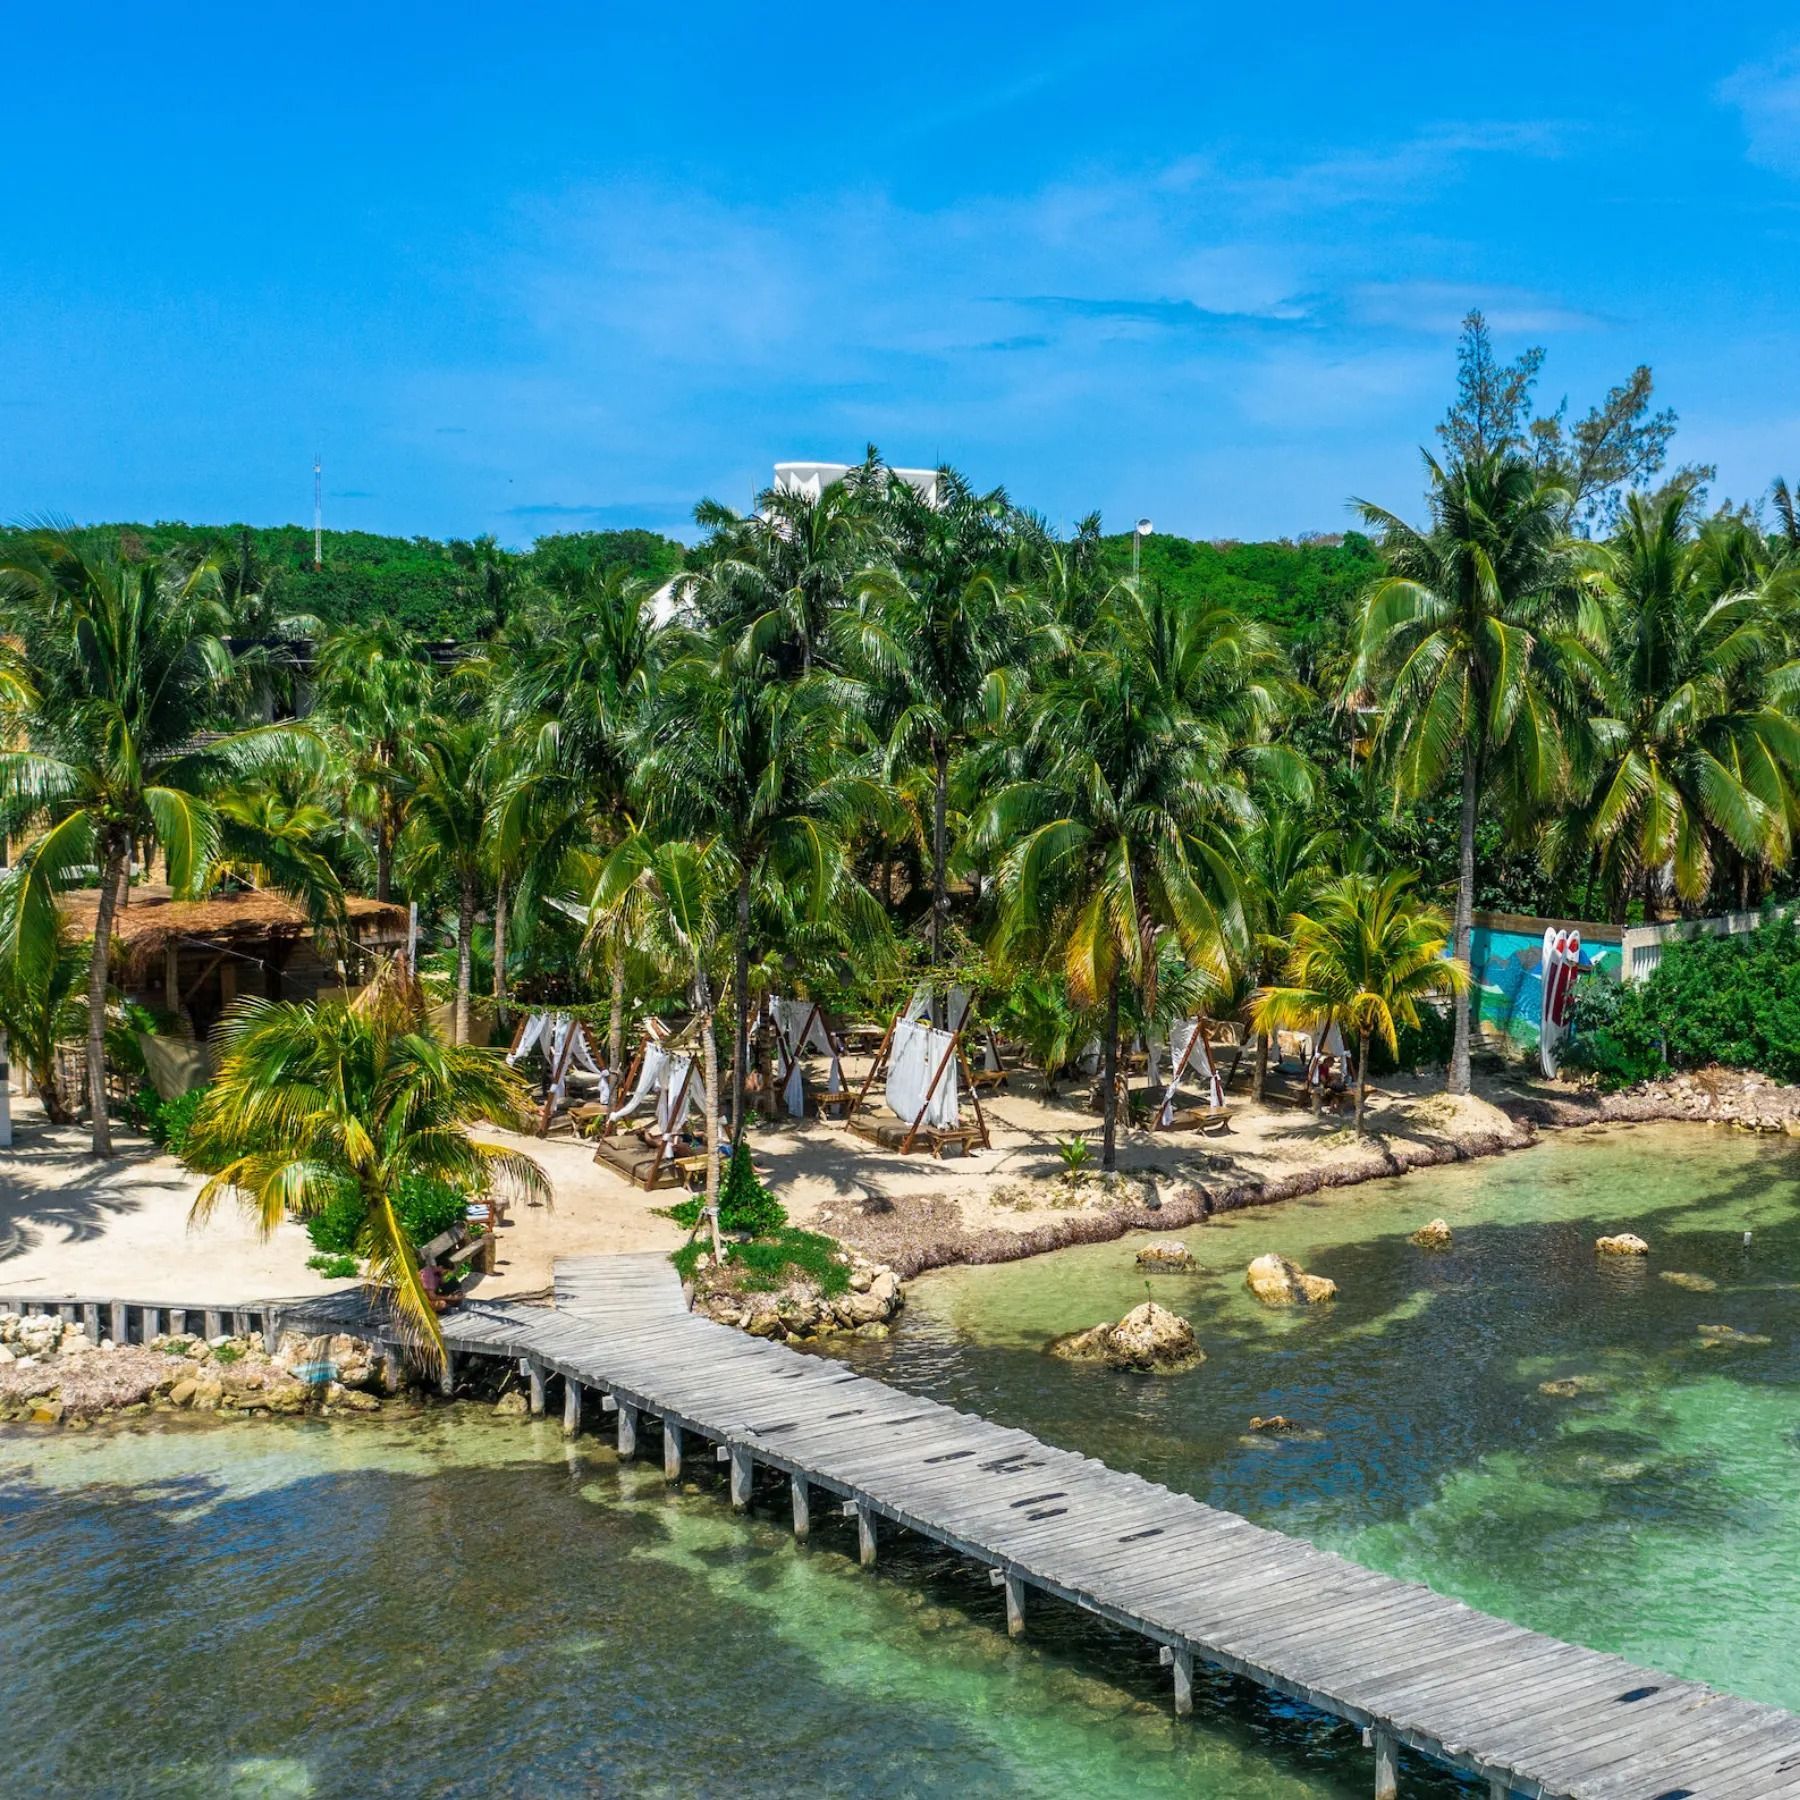 An aerial view of a wooden dock leading to a tropical island surrounded by palm trees.